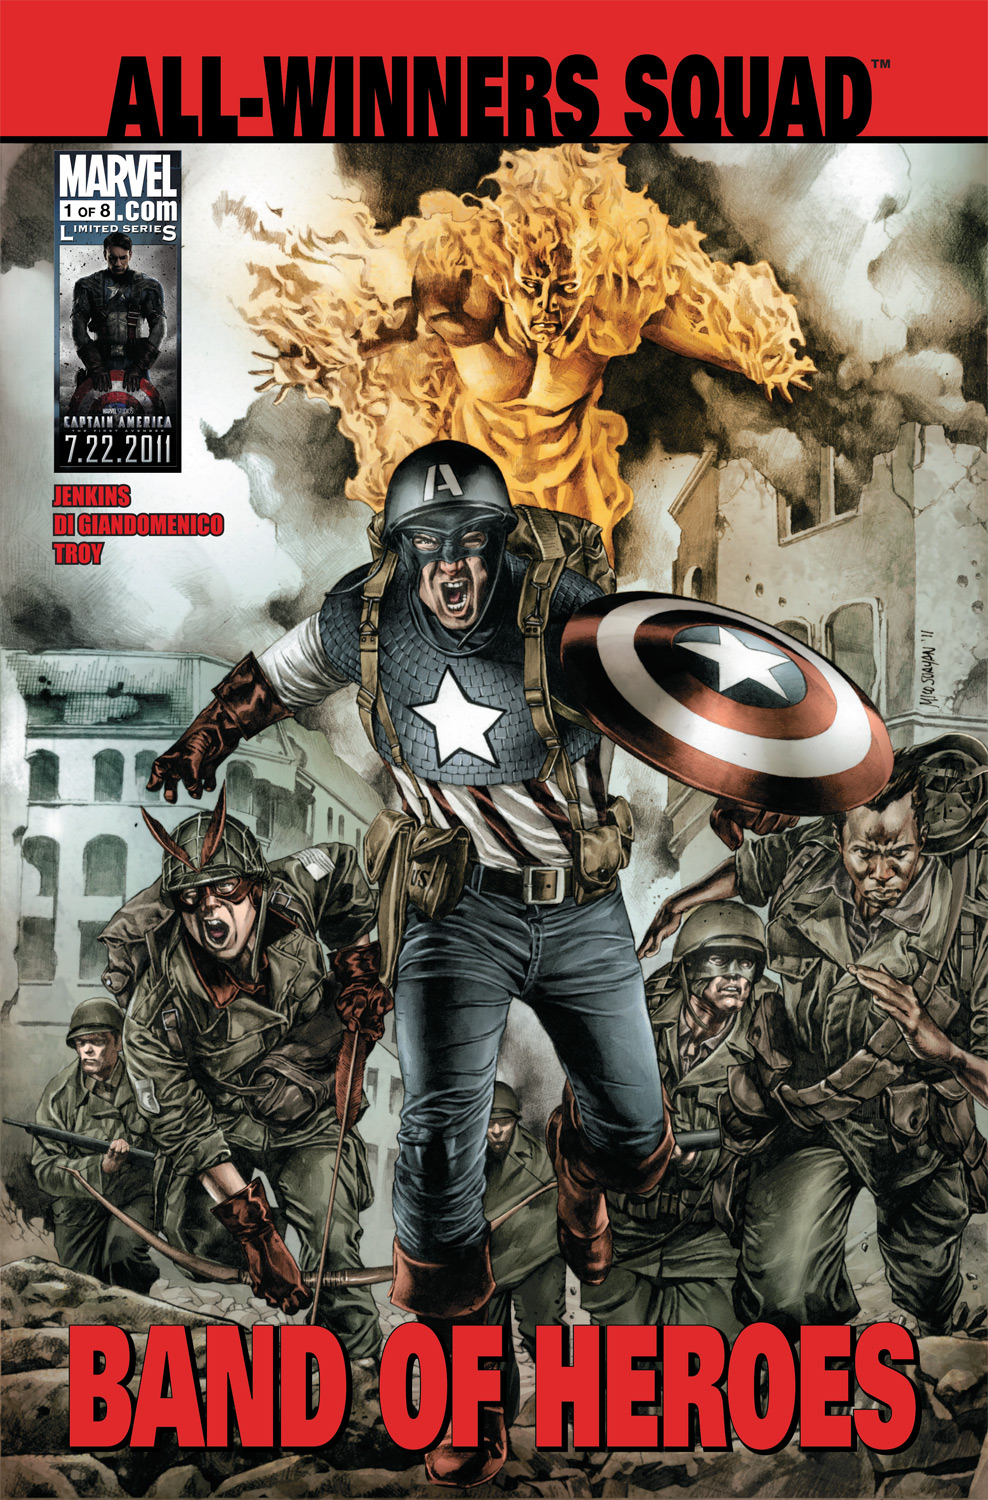 Issues All-Winners of (2011) Band | #1 Comic Heroes Squad: Marvel |